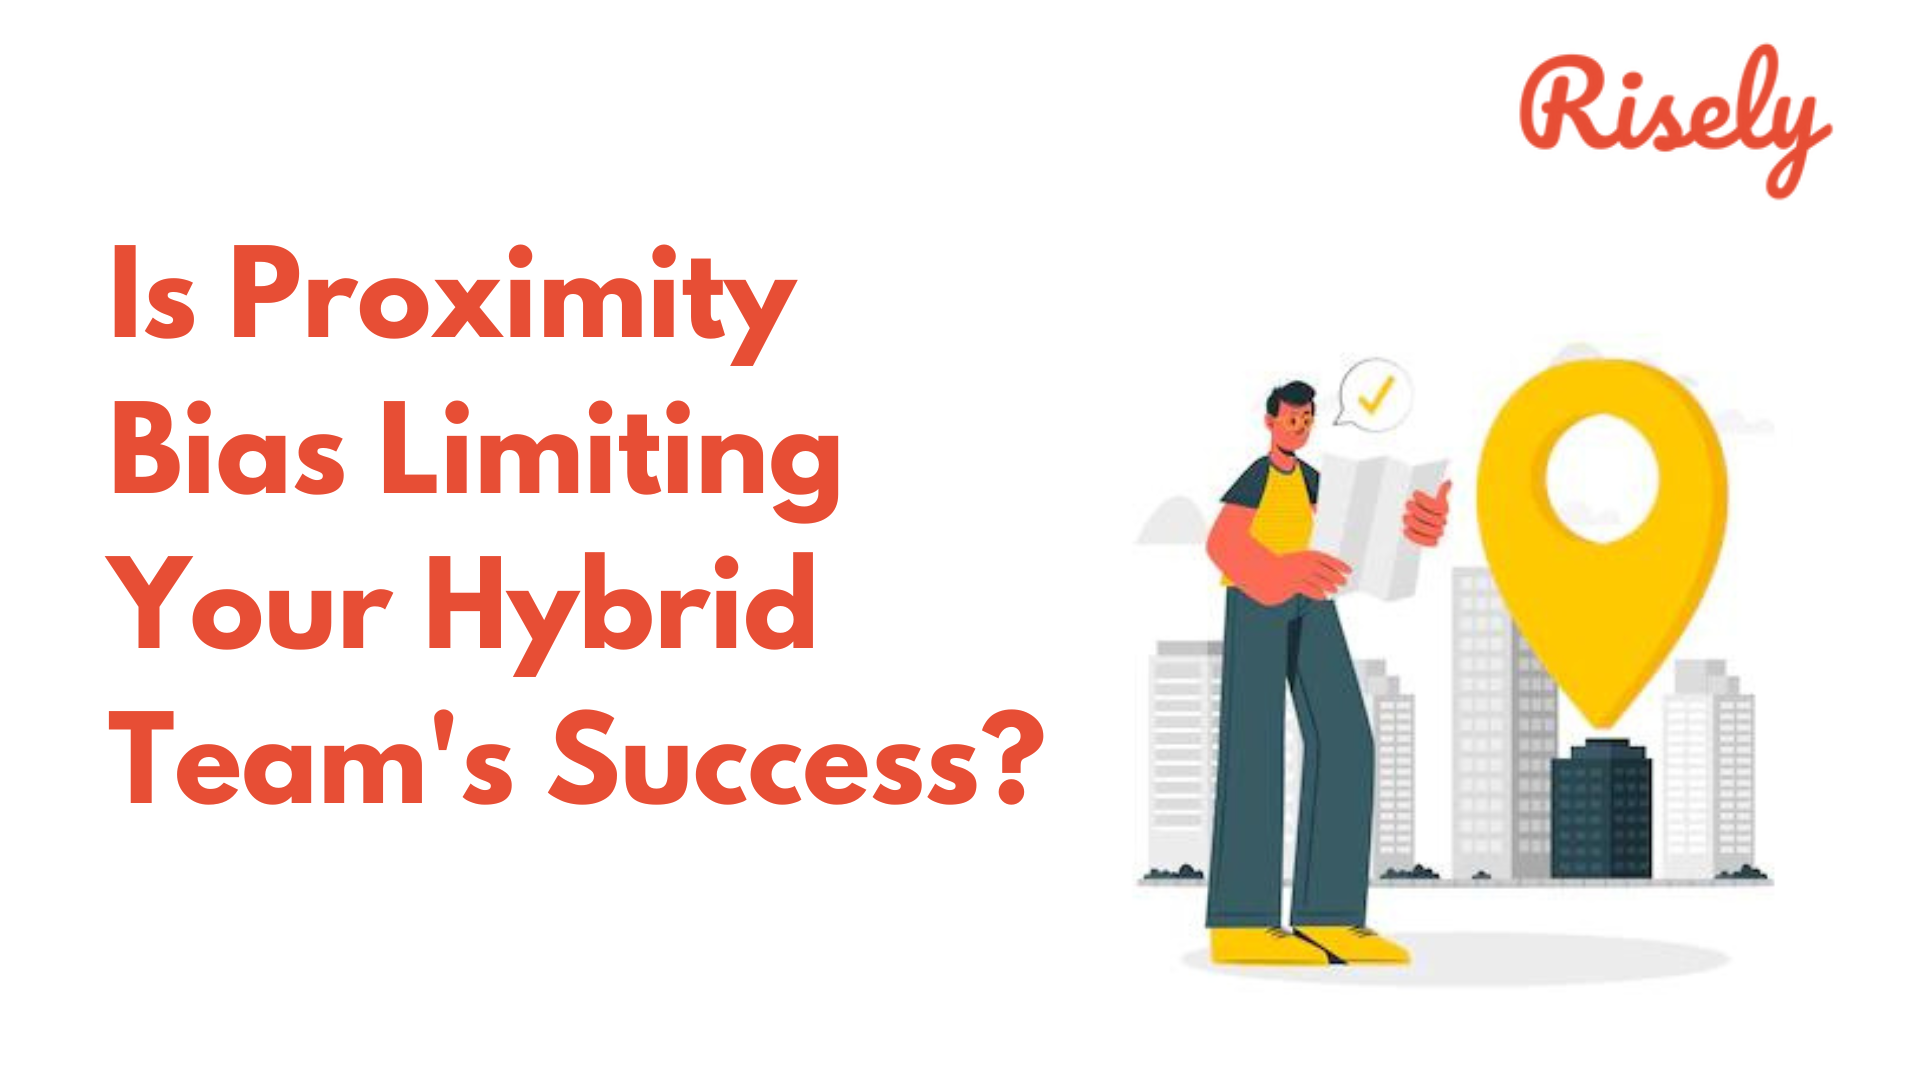 Is Proximity Bias Limiting Your Hybrid Team’s Success?